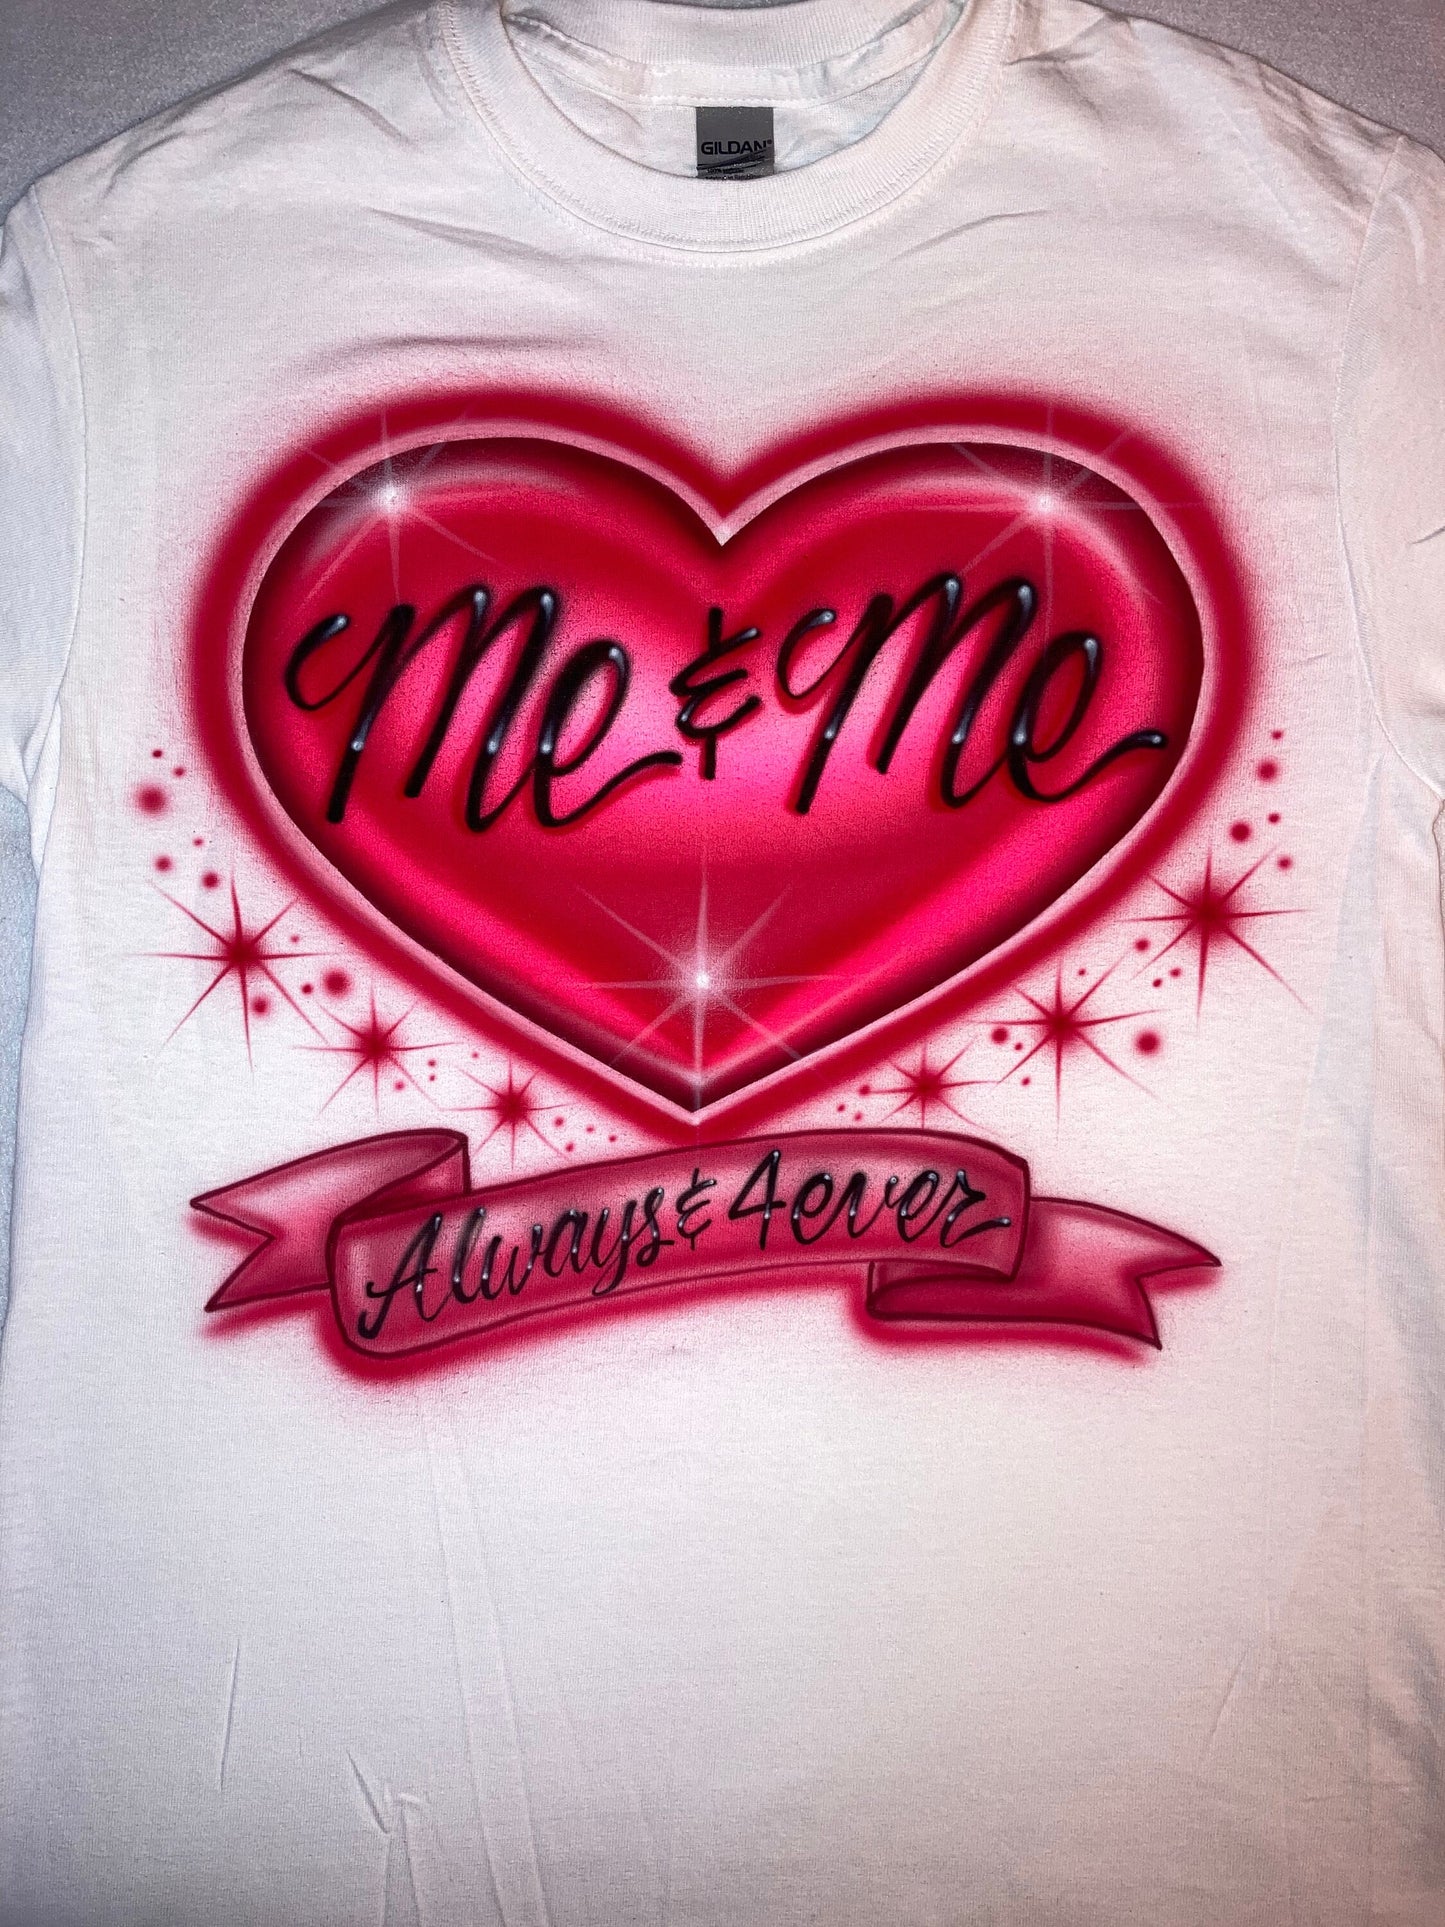 Heart * Love * Self * Airbrushed T-shirt * Your Name * Always * Forever *